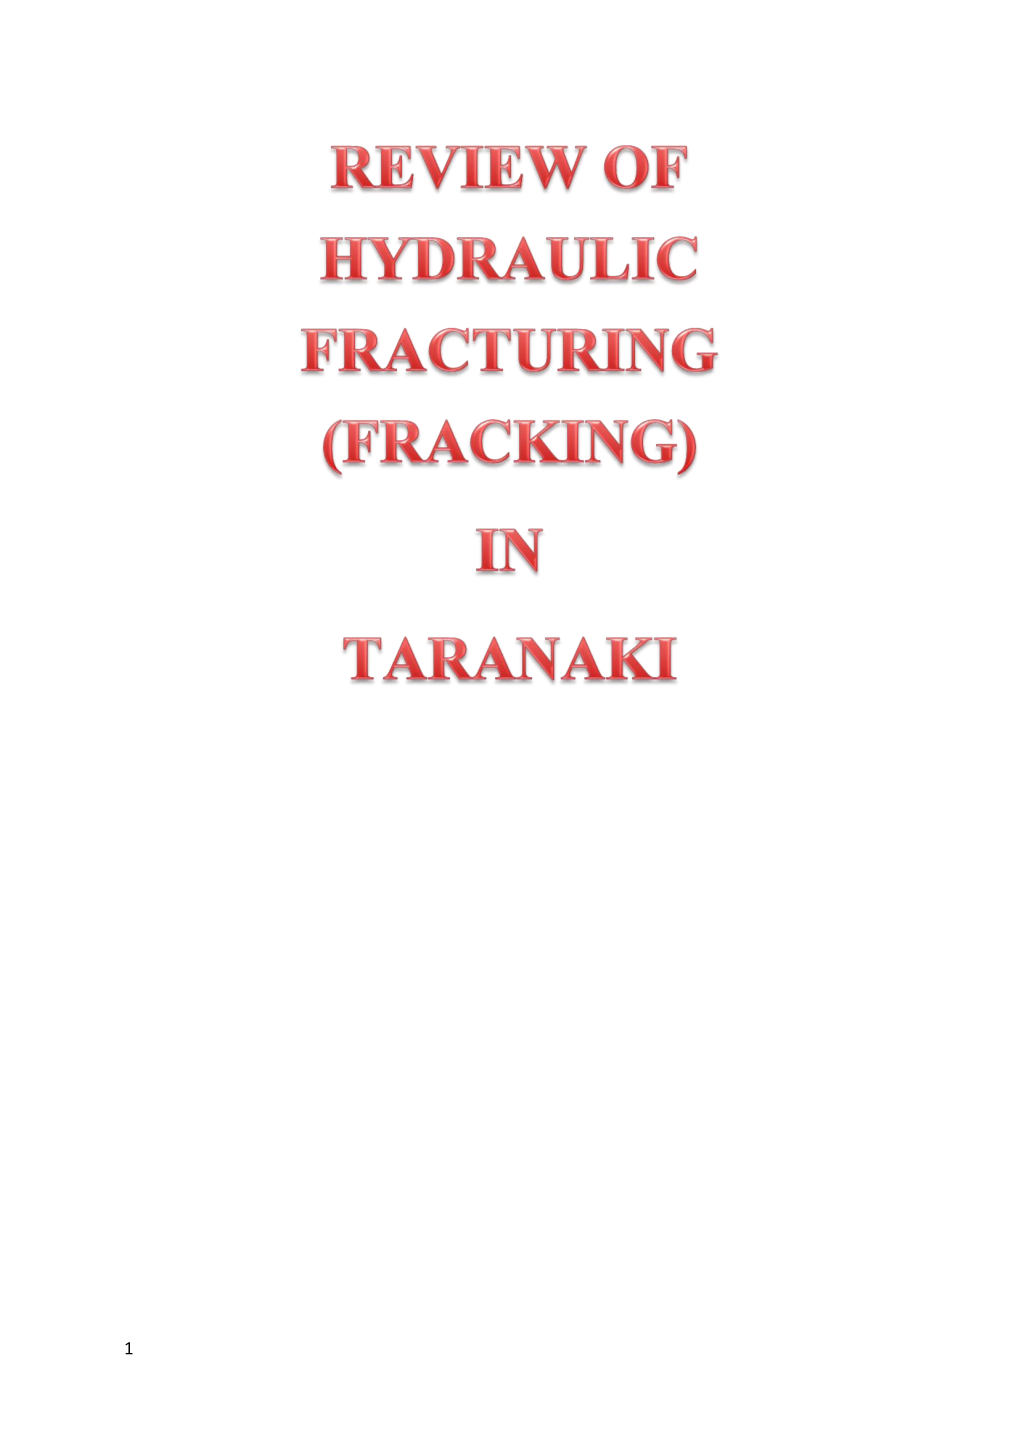 Review of Hydraulic Fracturing (Fracking